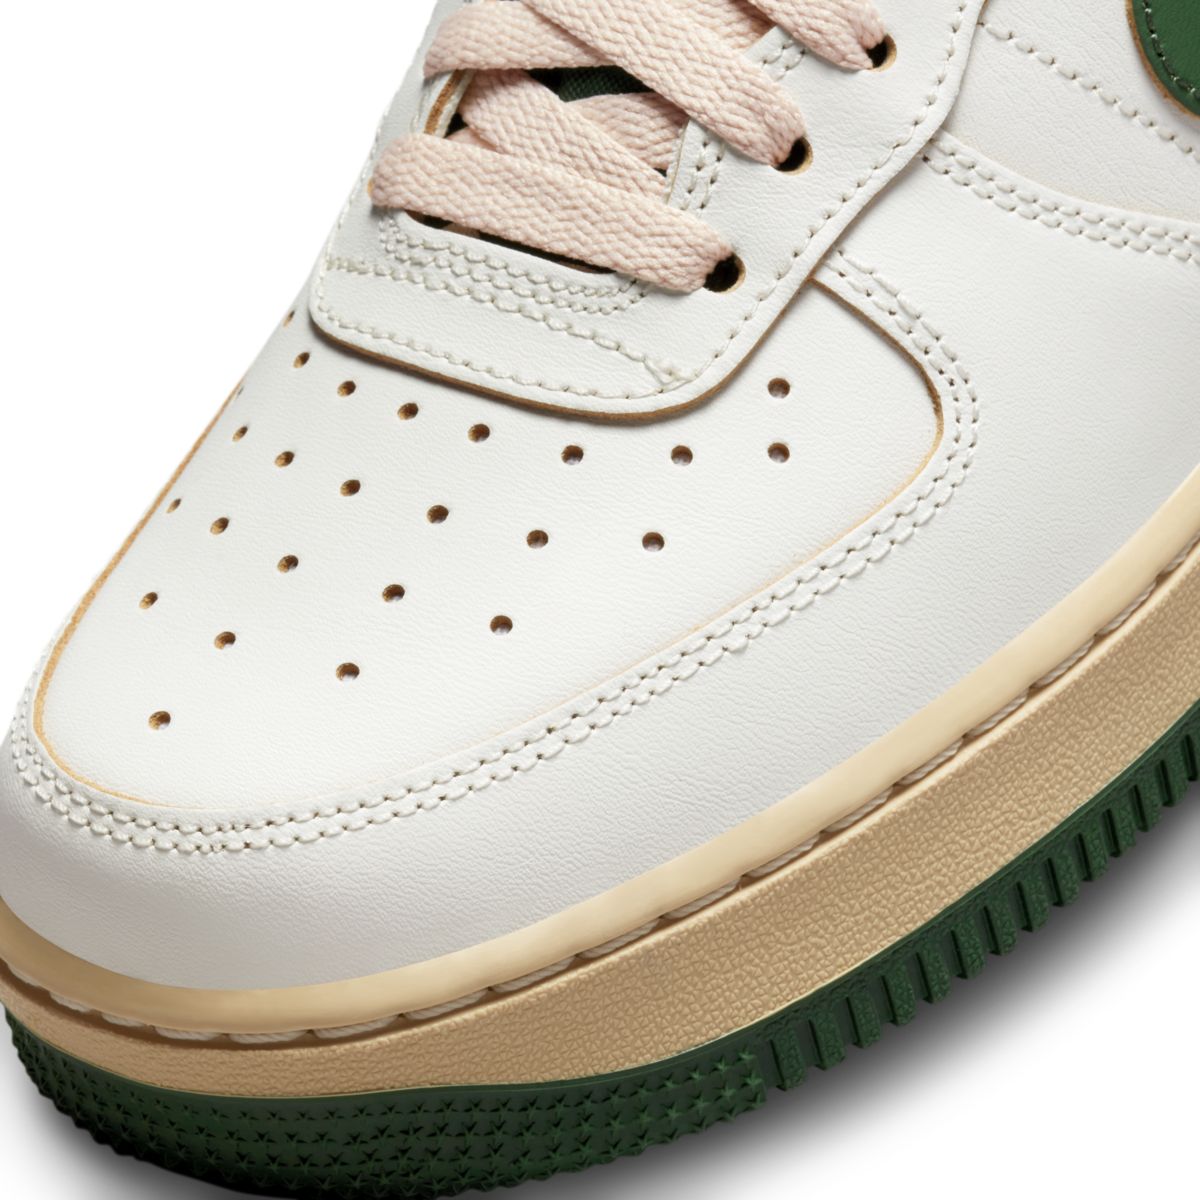 Nike Air Force 1 Low Gorge Green DZ4764-133 6